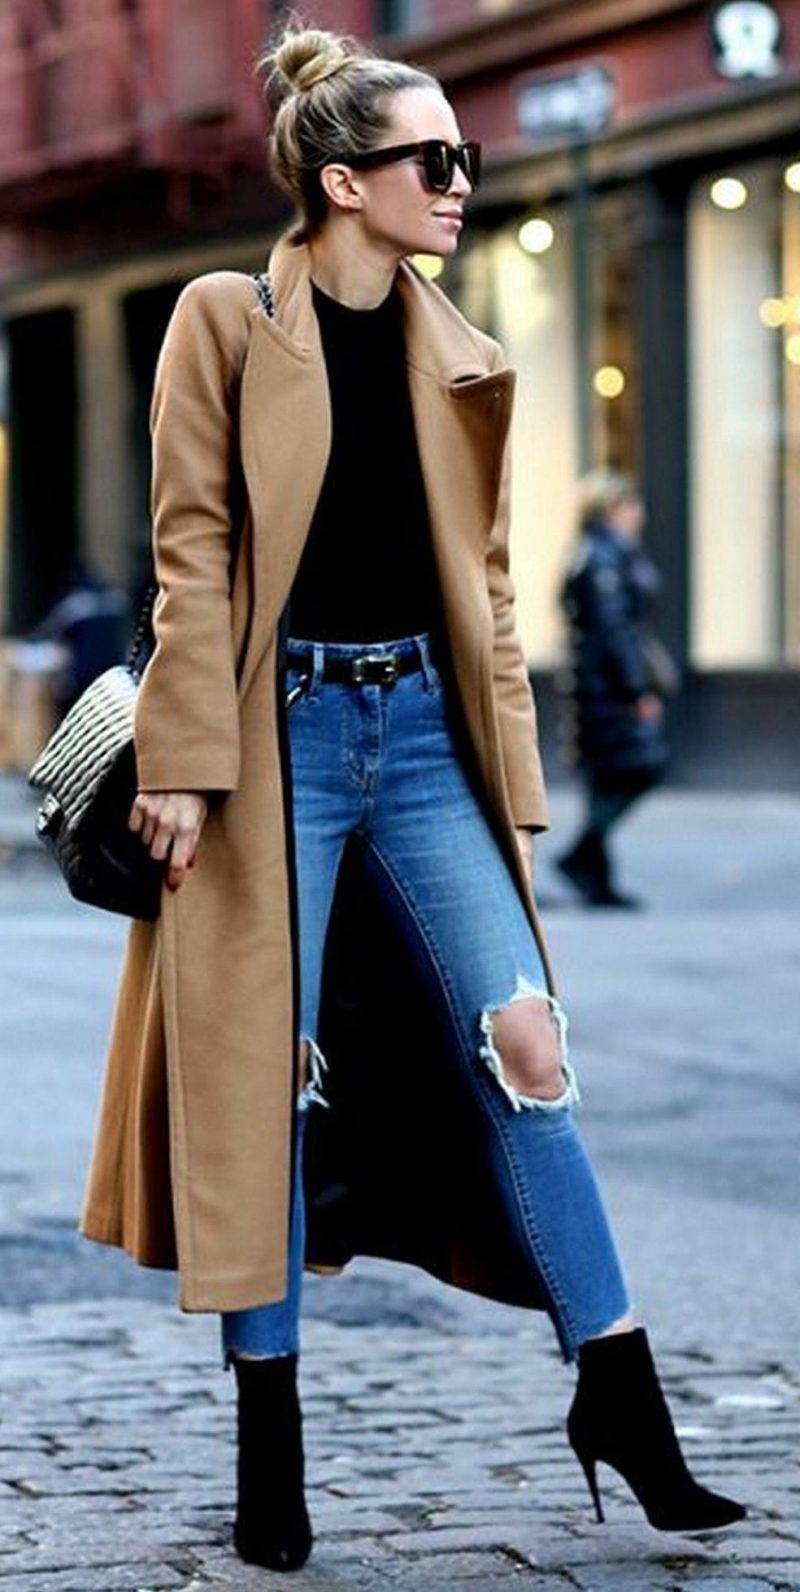 Ankle Boots And Jeans Combination For Ladies 2022